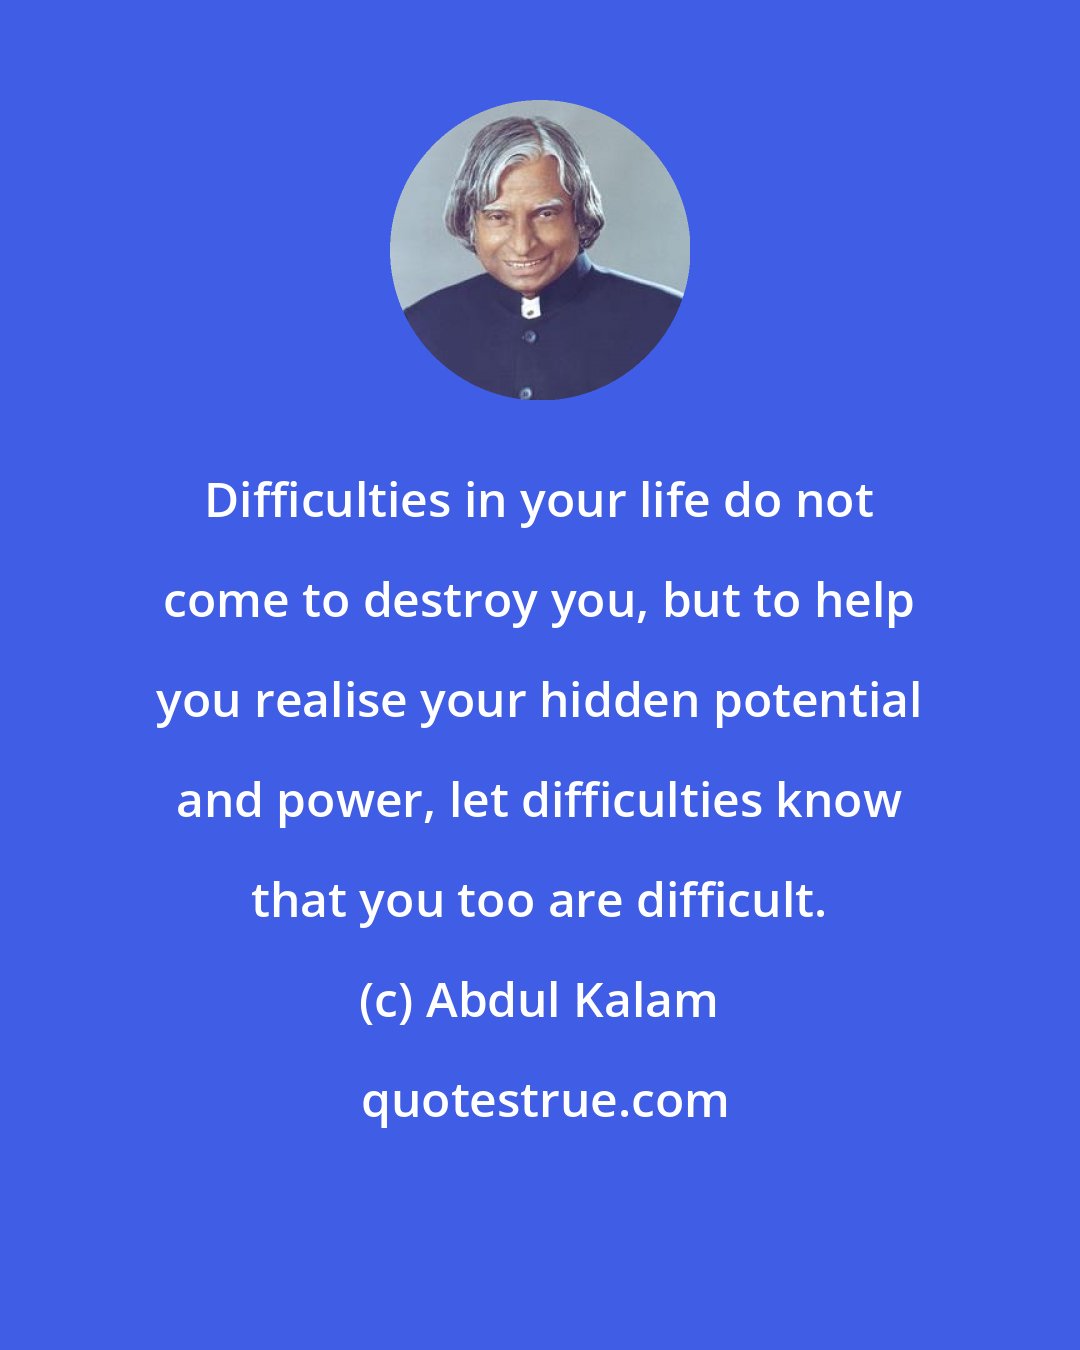 Abdul Kalam: Difficulties in your life do not come to destroy you, but to help you realise your hidden potential and power, let difficulties know that you too are difficult.